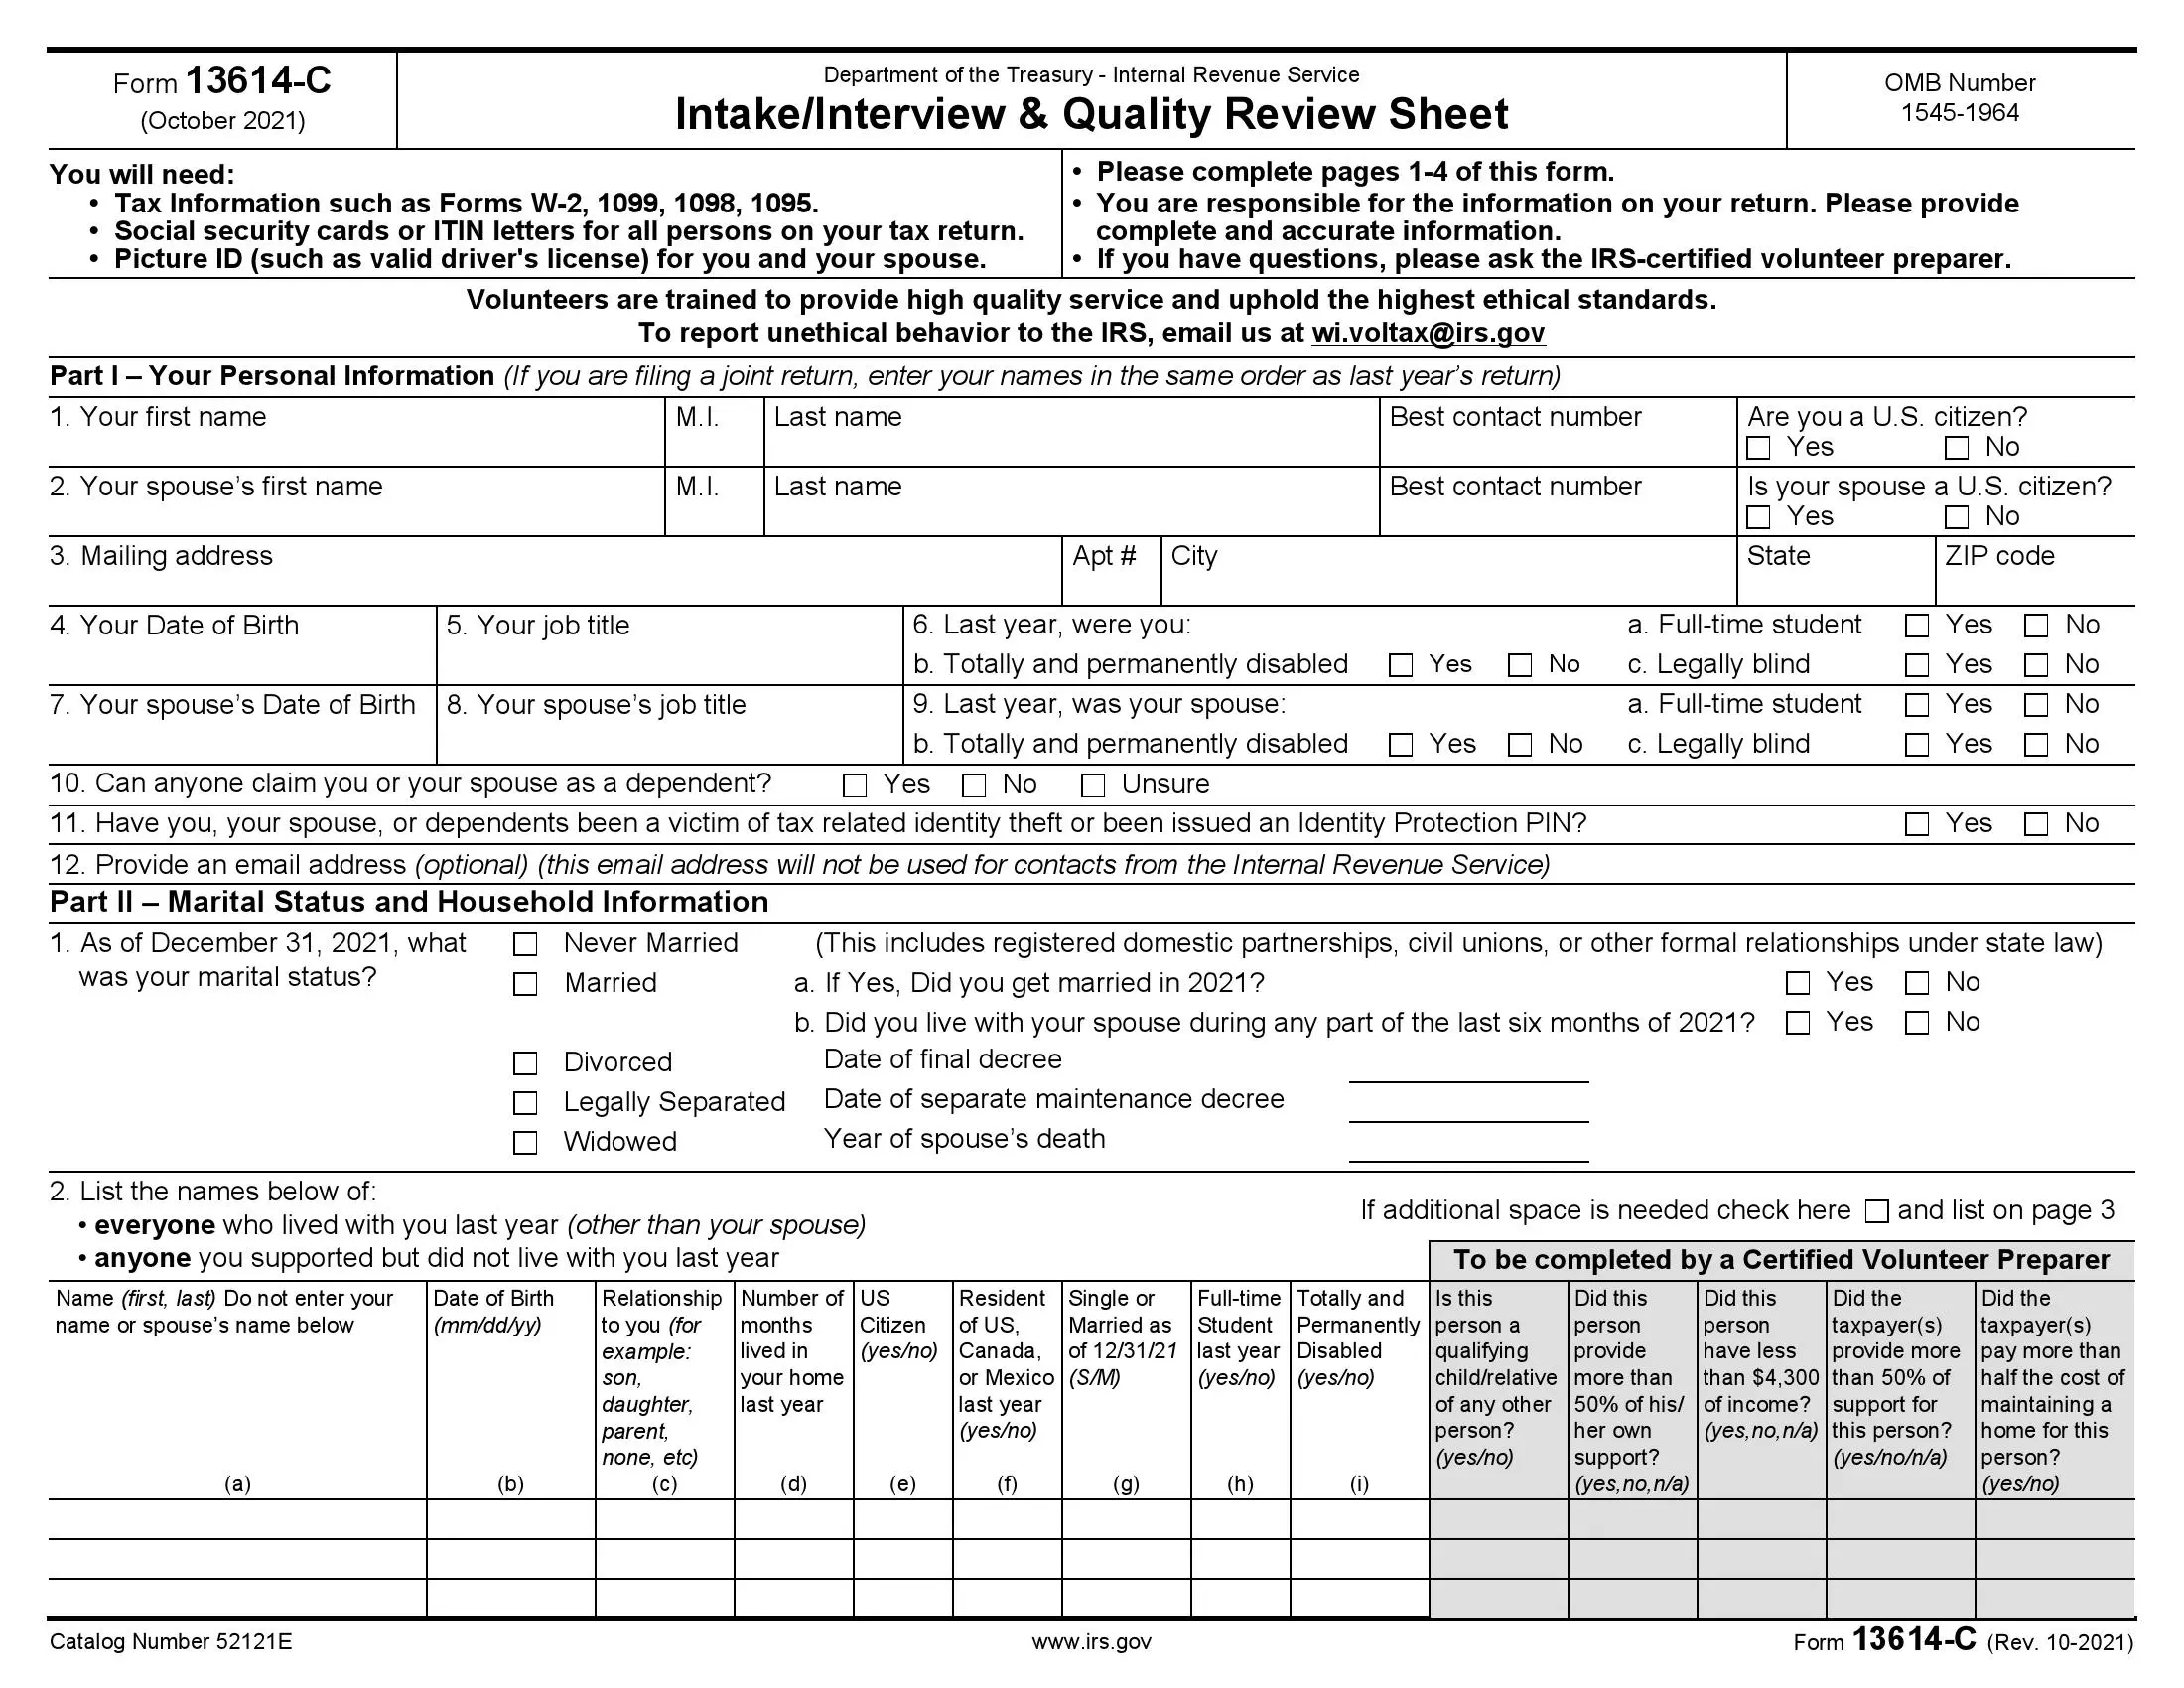 irs form 13614-c rev 10 2021 preview